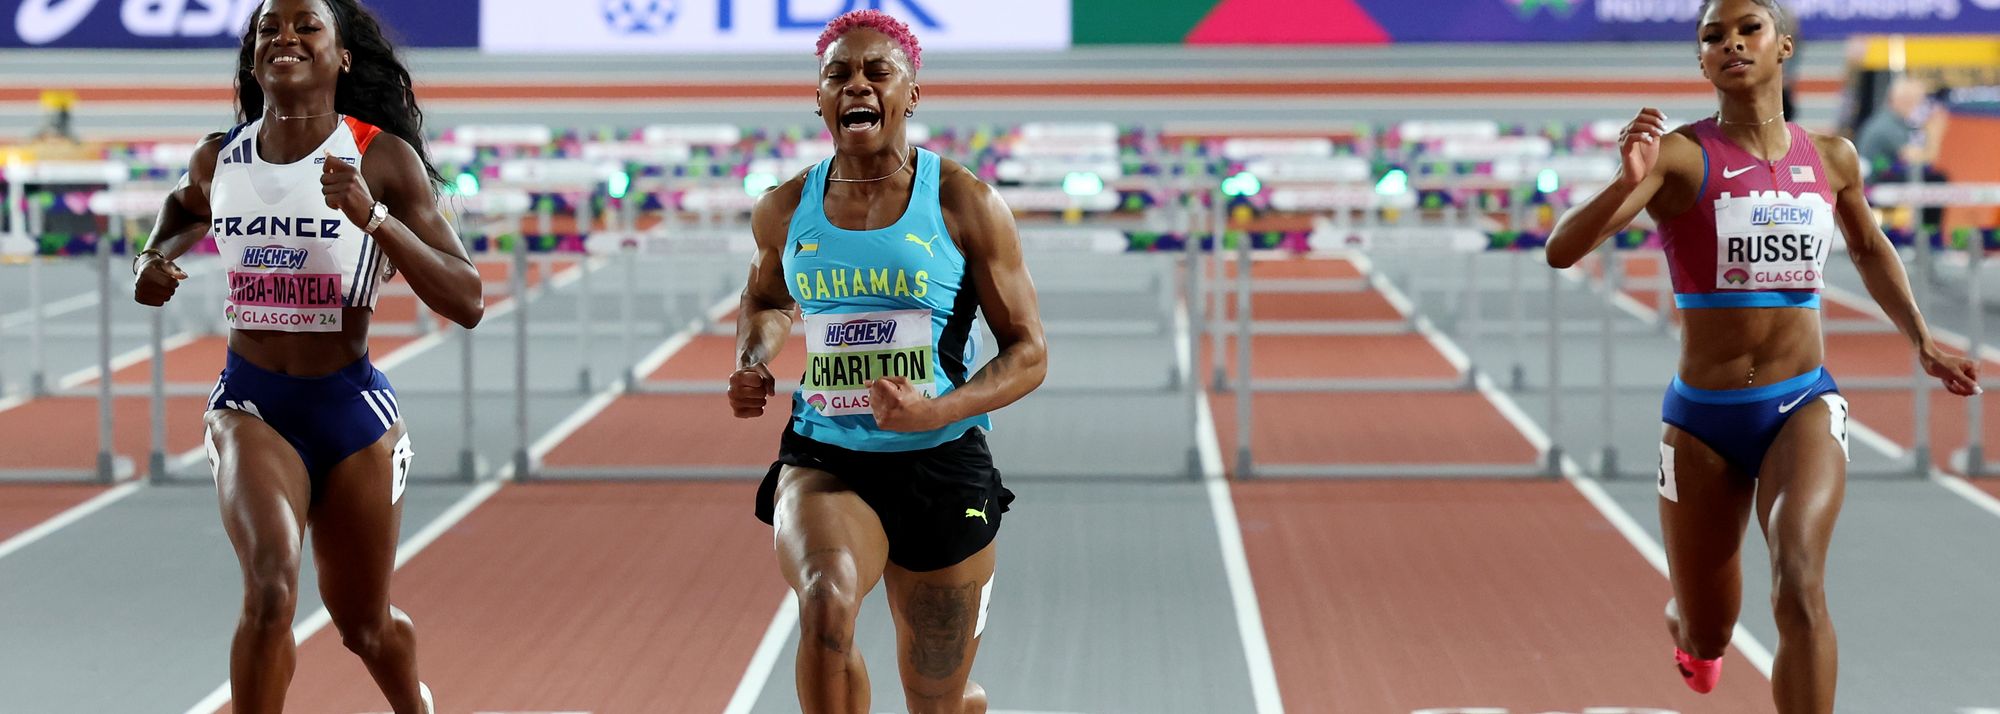 Few have burned ink messages as potent as 28-year-old Bahamian hurdles star Devynne Charlton